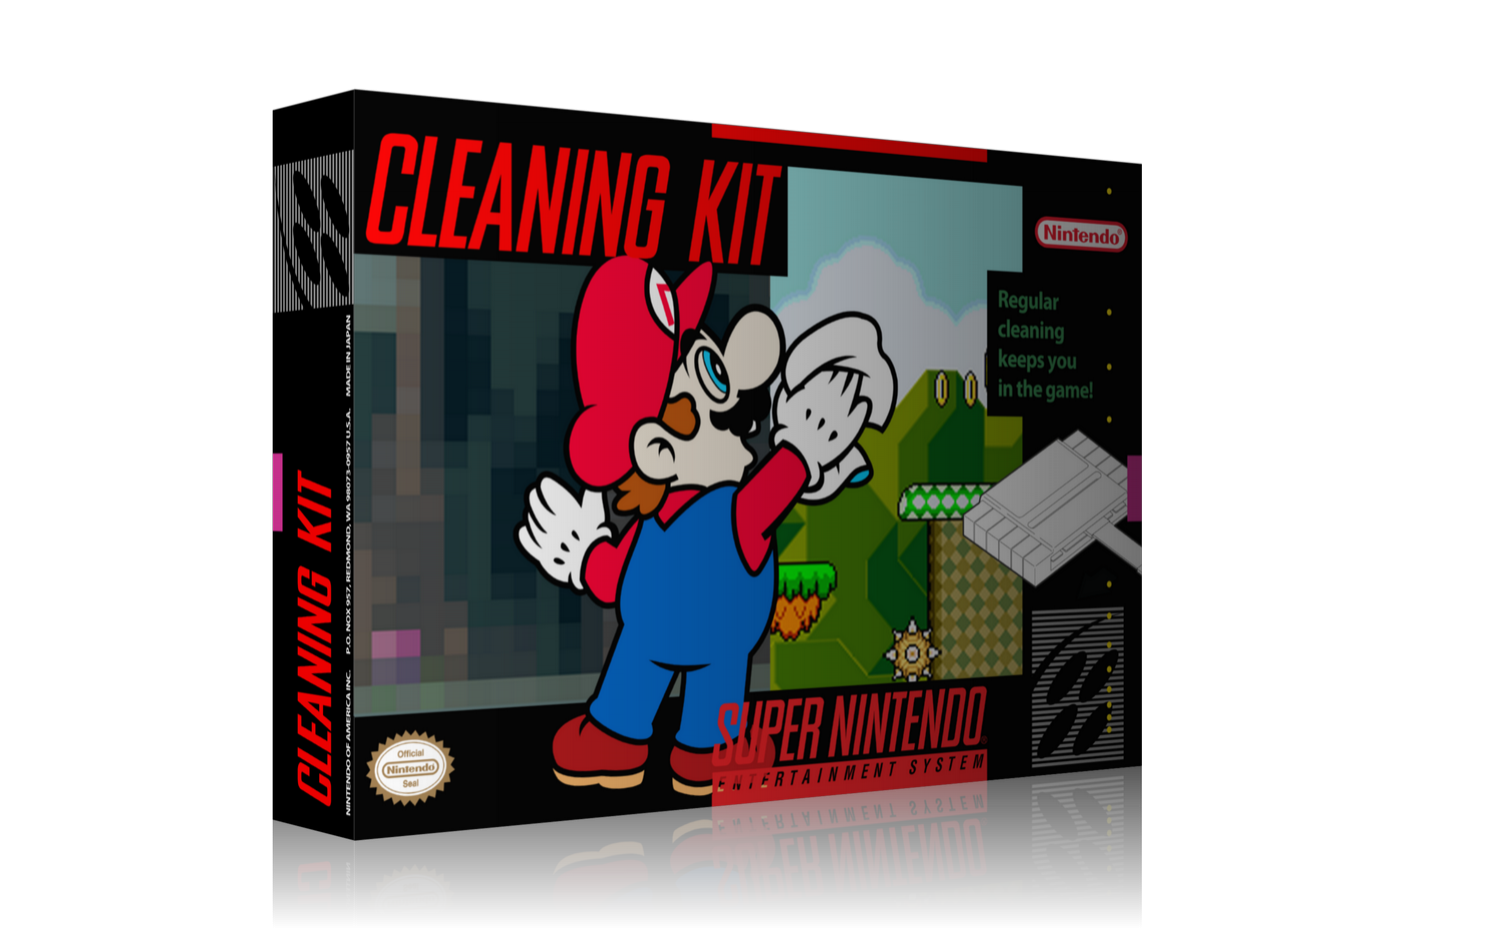 Super Nintendo Cleaning Kit box cover